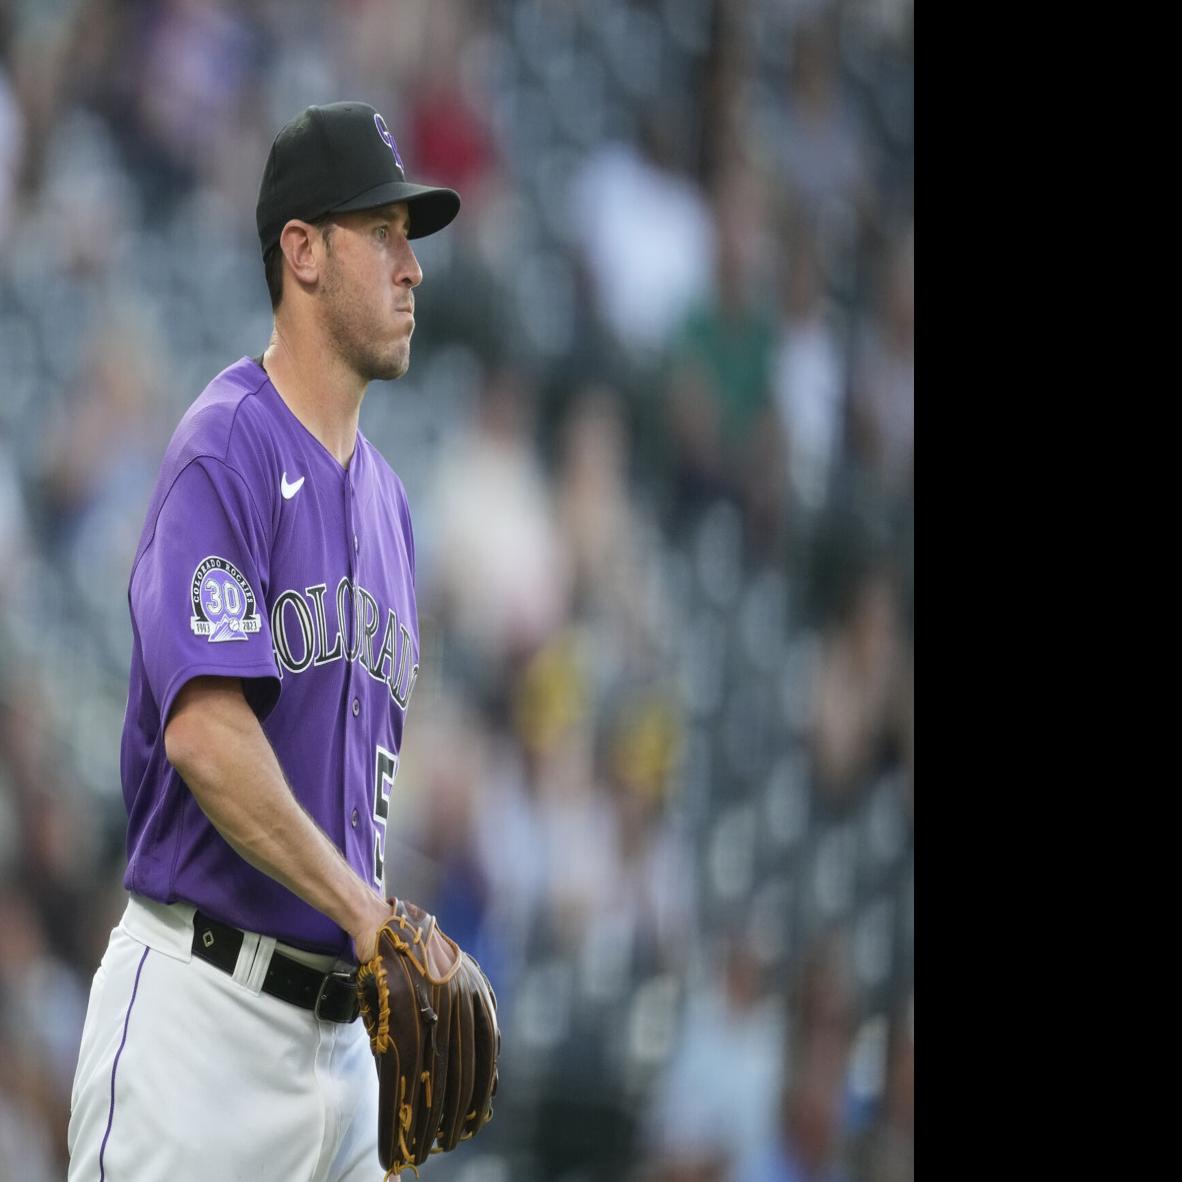 Ty Blach gives Rockies strong start, but bullpen collapses in loss